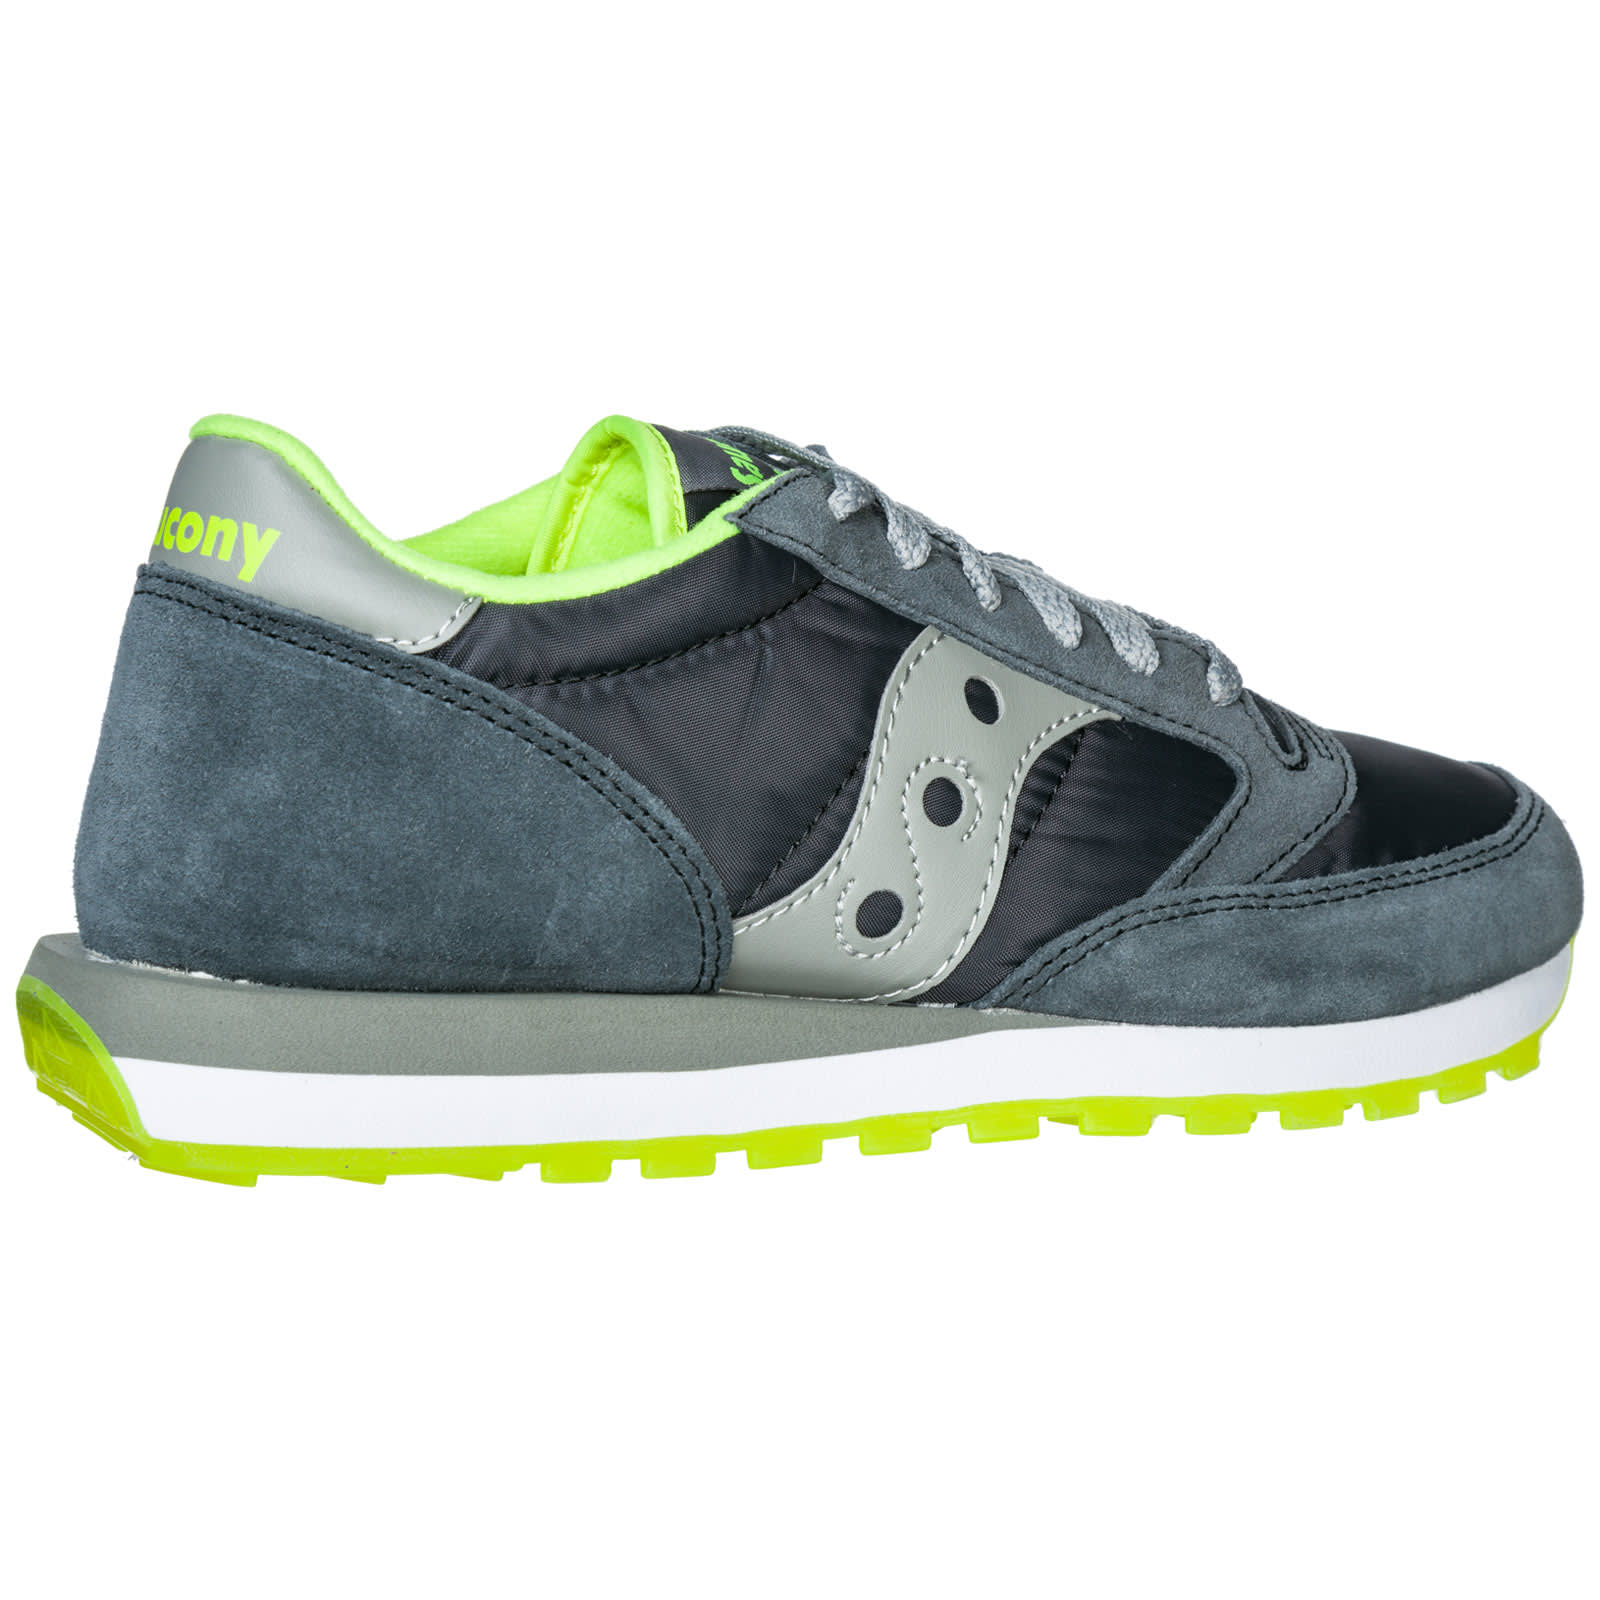 Saucony Shoes Suede Trainers Sneakers 